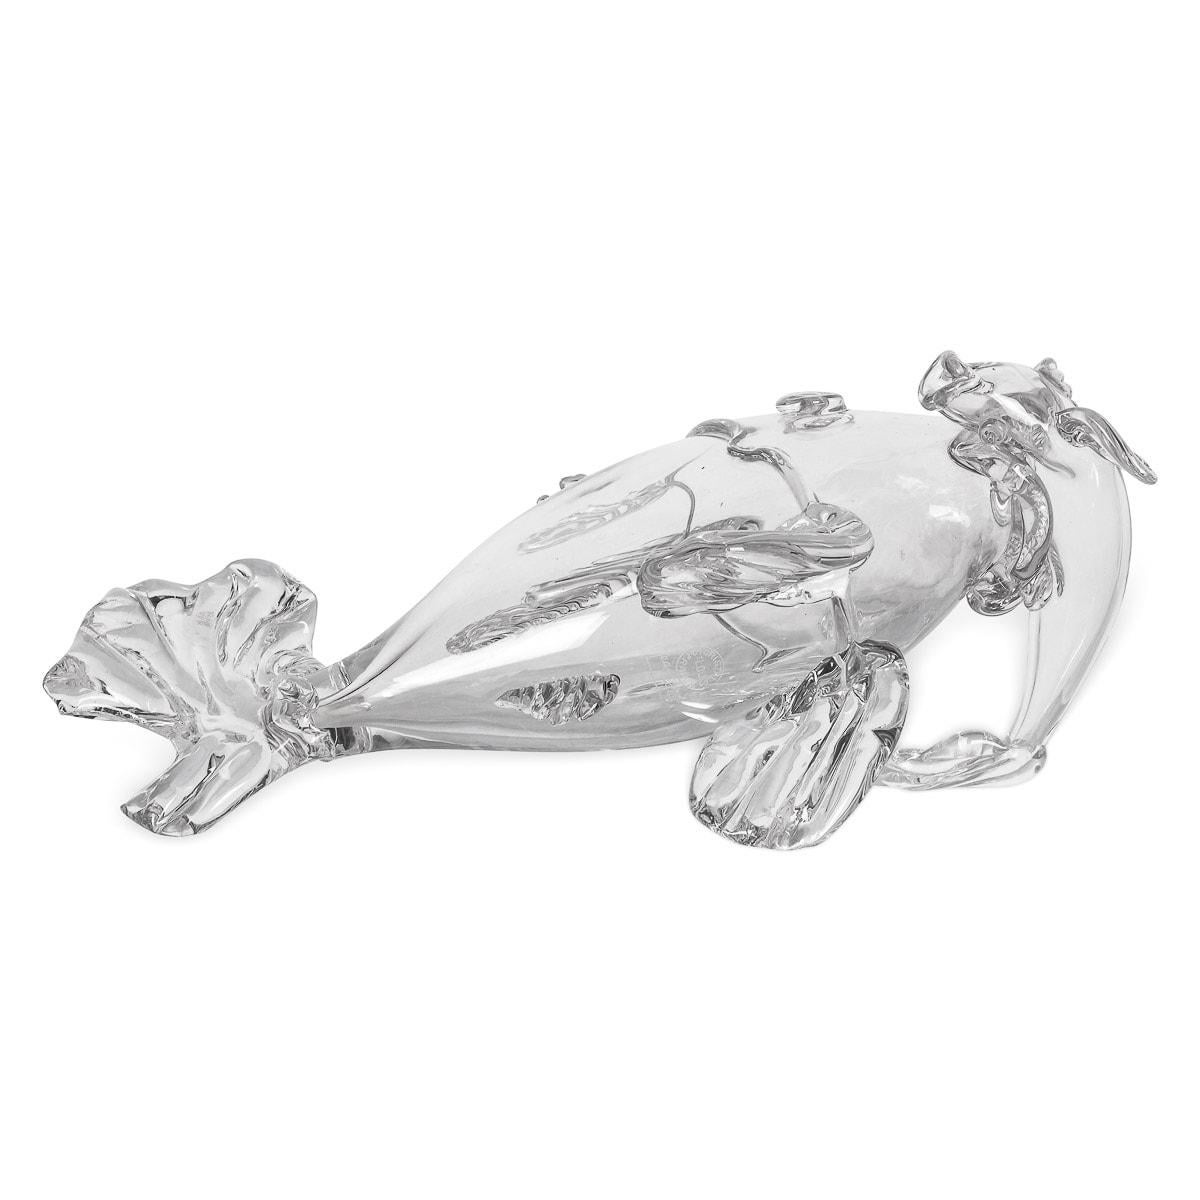 French 20th Century Saint Louis Crystal Fish By Jean Sala, '1895-1976' For Sale